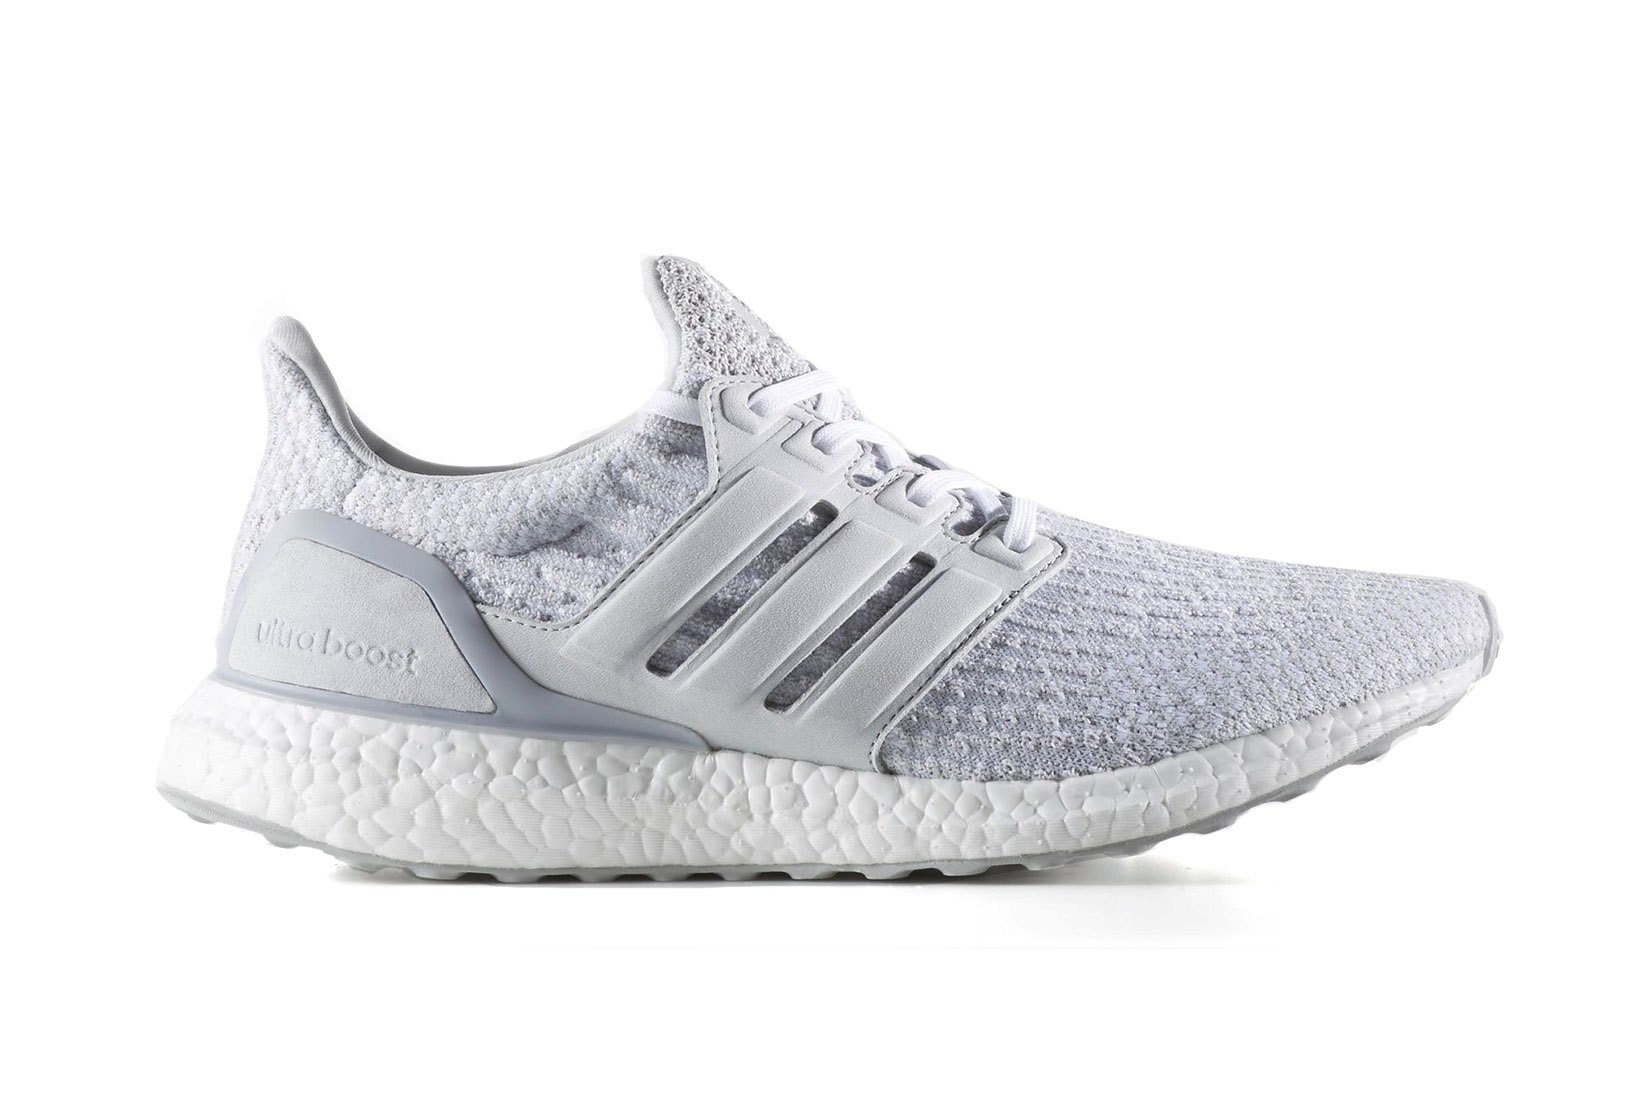 Reigning Champ x adidas UltraBOOST NYC Exclusive | Hypebeast